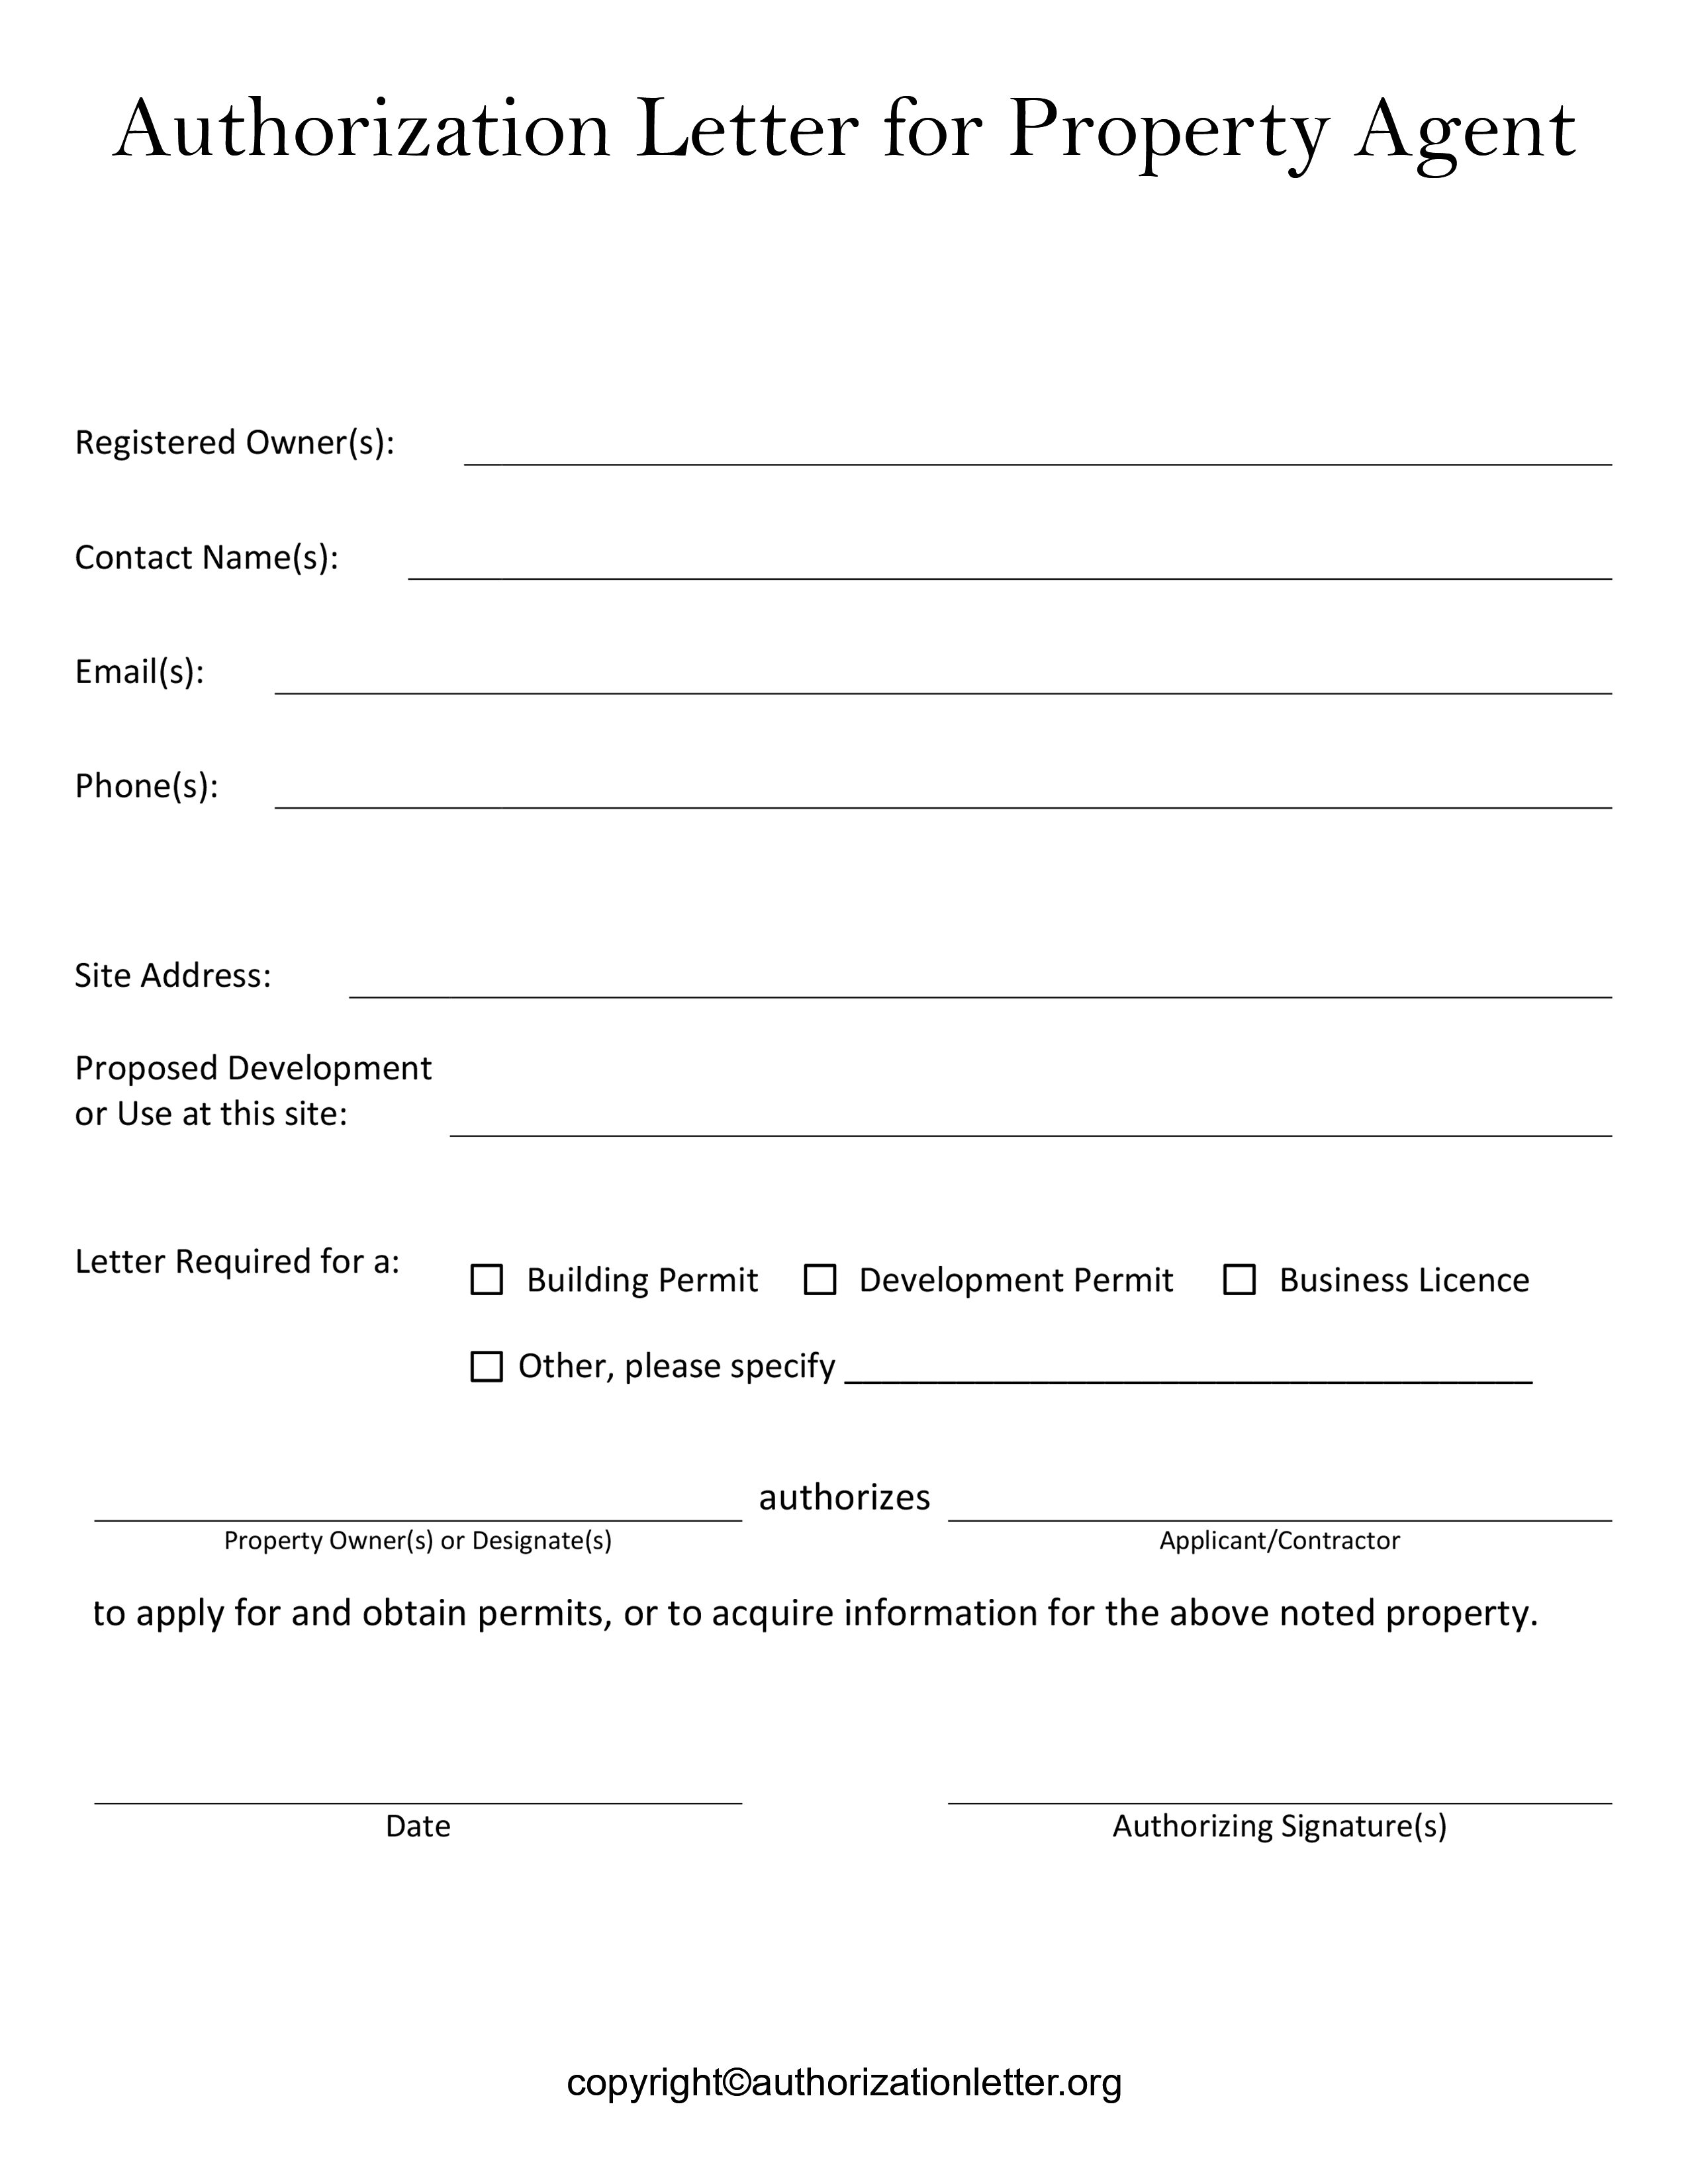 Free Authorization Letter for Property Agent in PDF